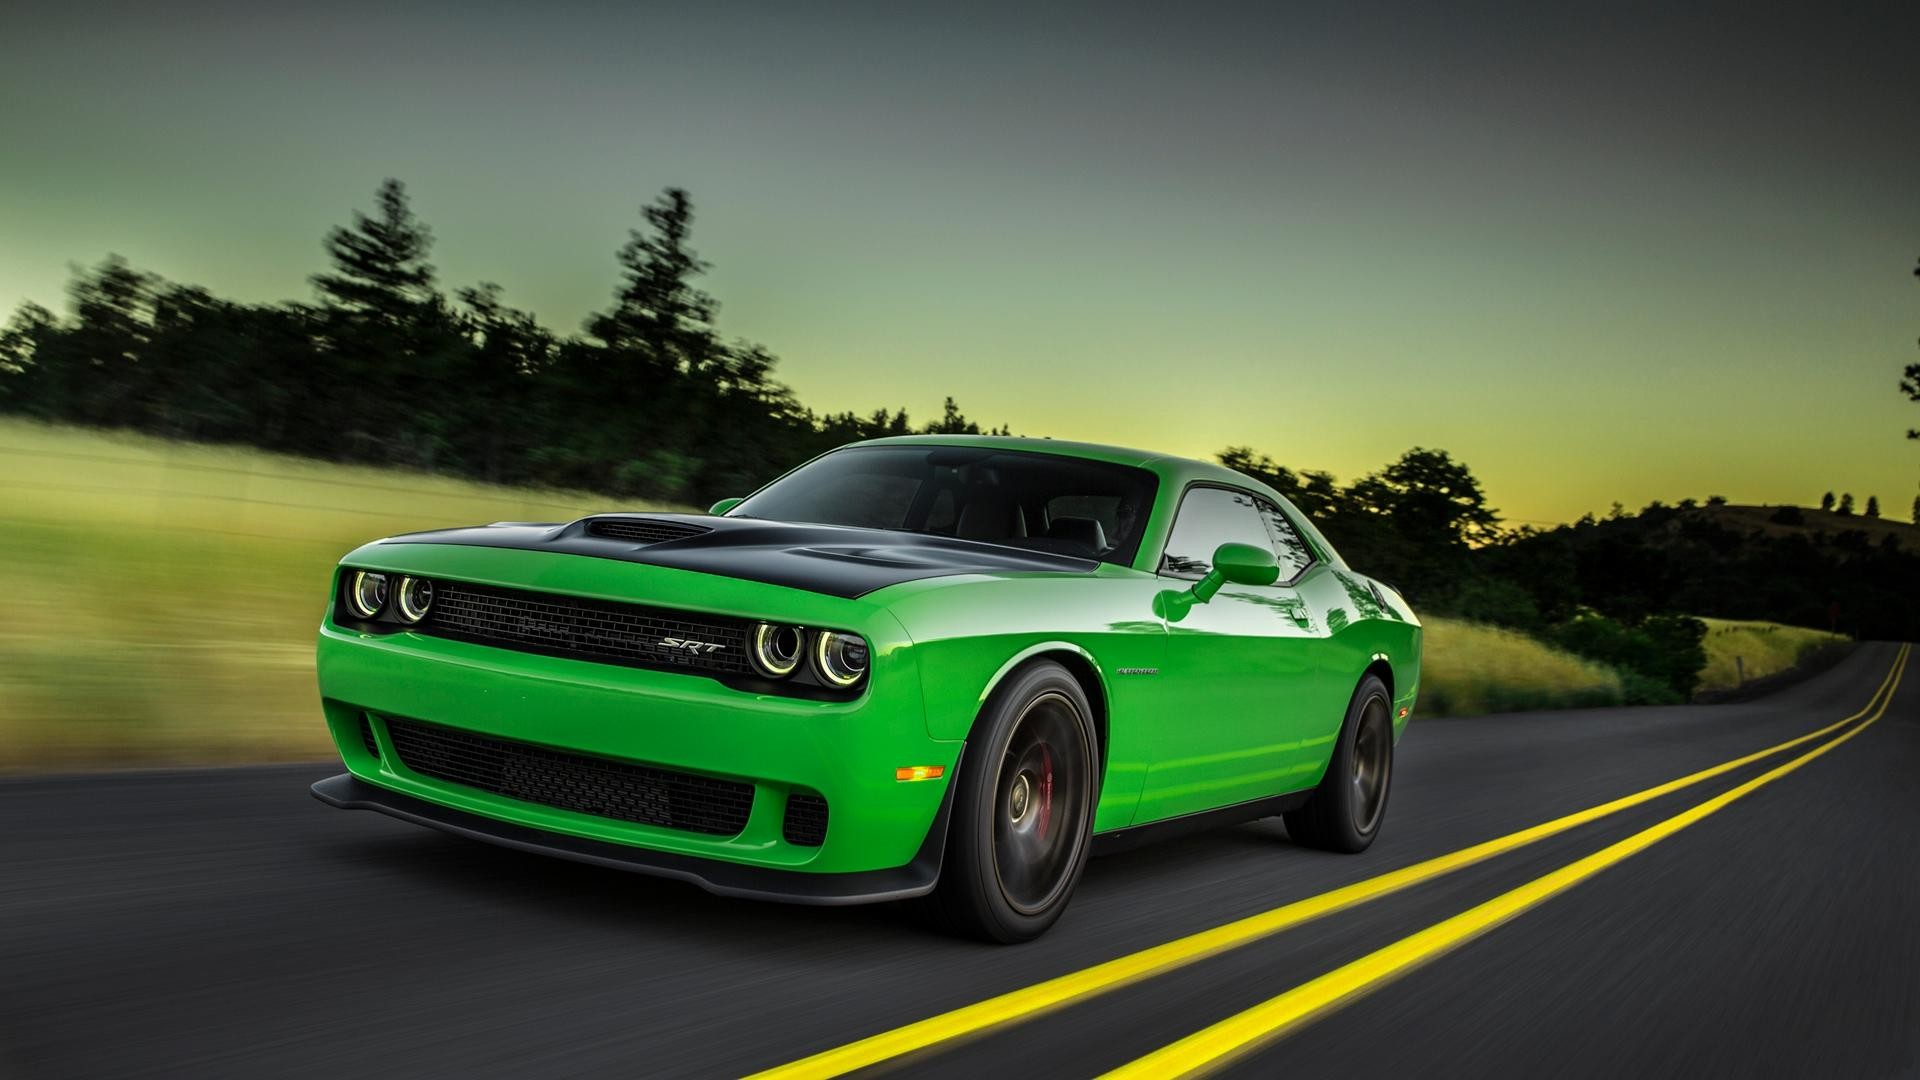 1920x1080 wallpaper.wiki-HD-Dodge-Challenger-Images-PIC-WPD008740